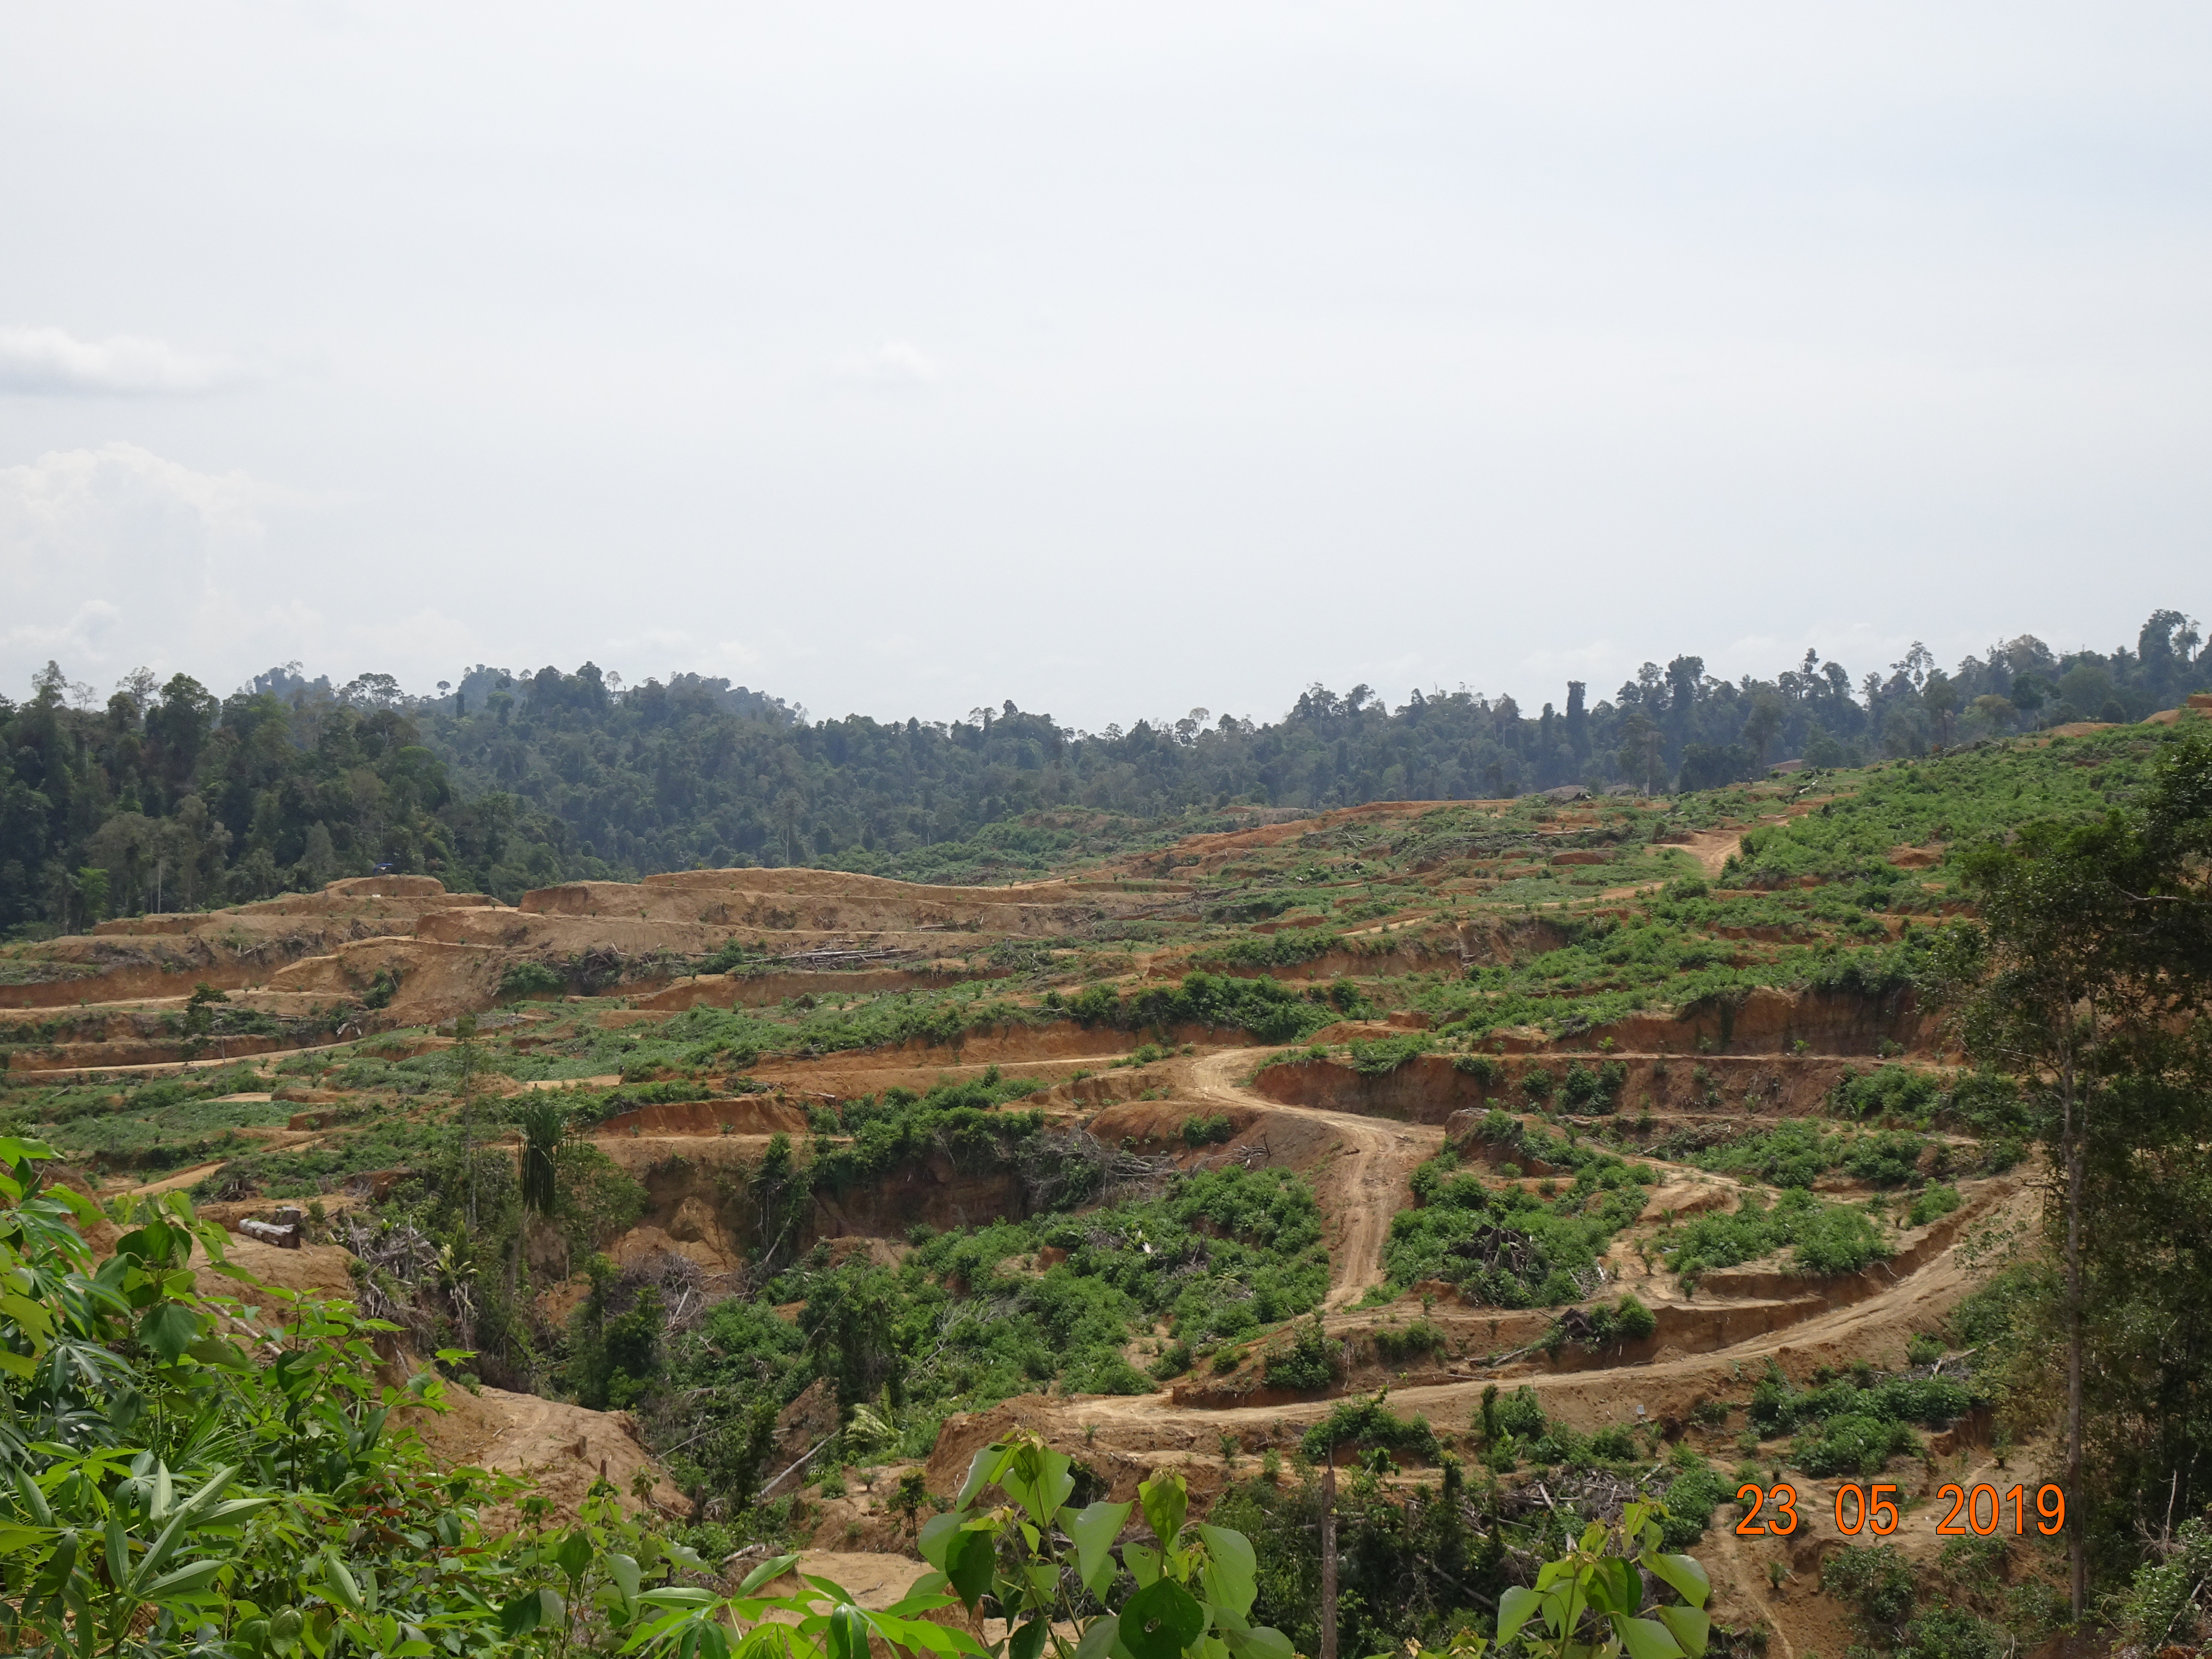 Expansion of palm oil plantation by PT Nia Yulided, May 23 2019 GPS N 04 2 ’40.2 E 097 49 51.6